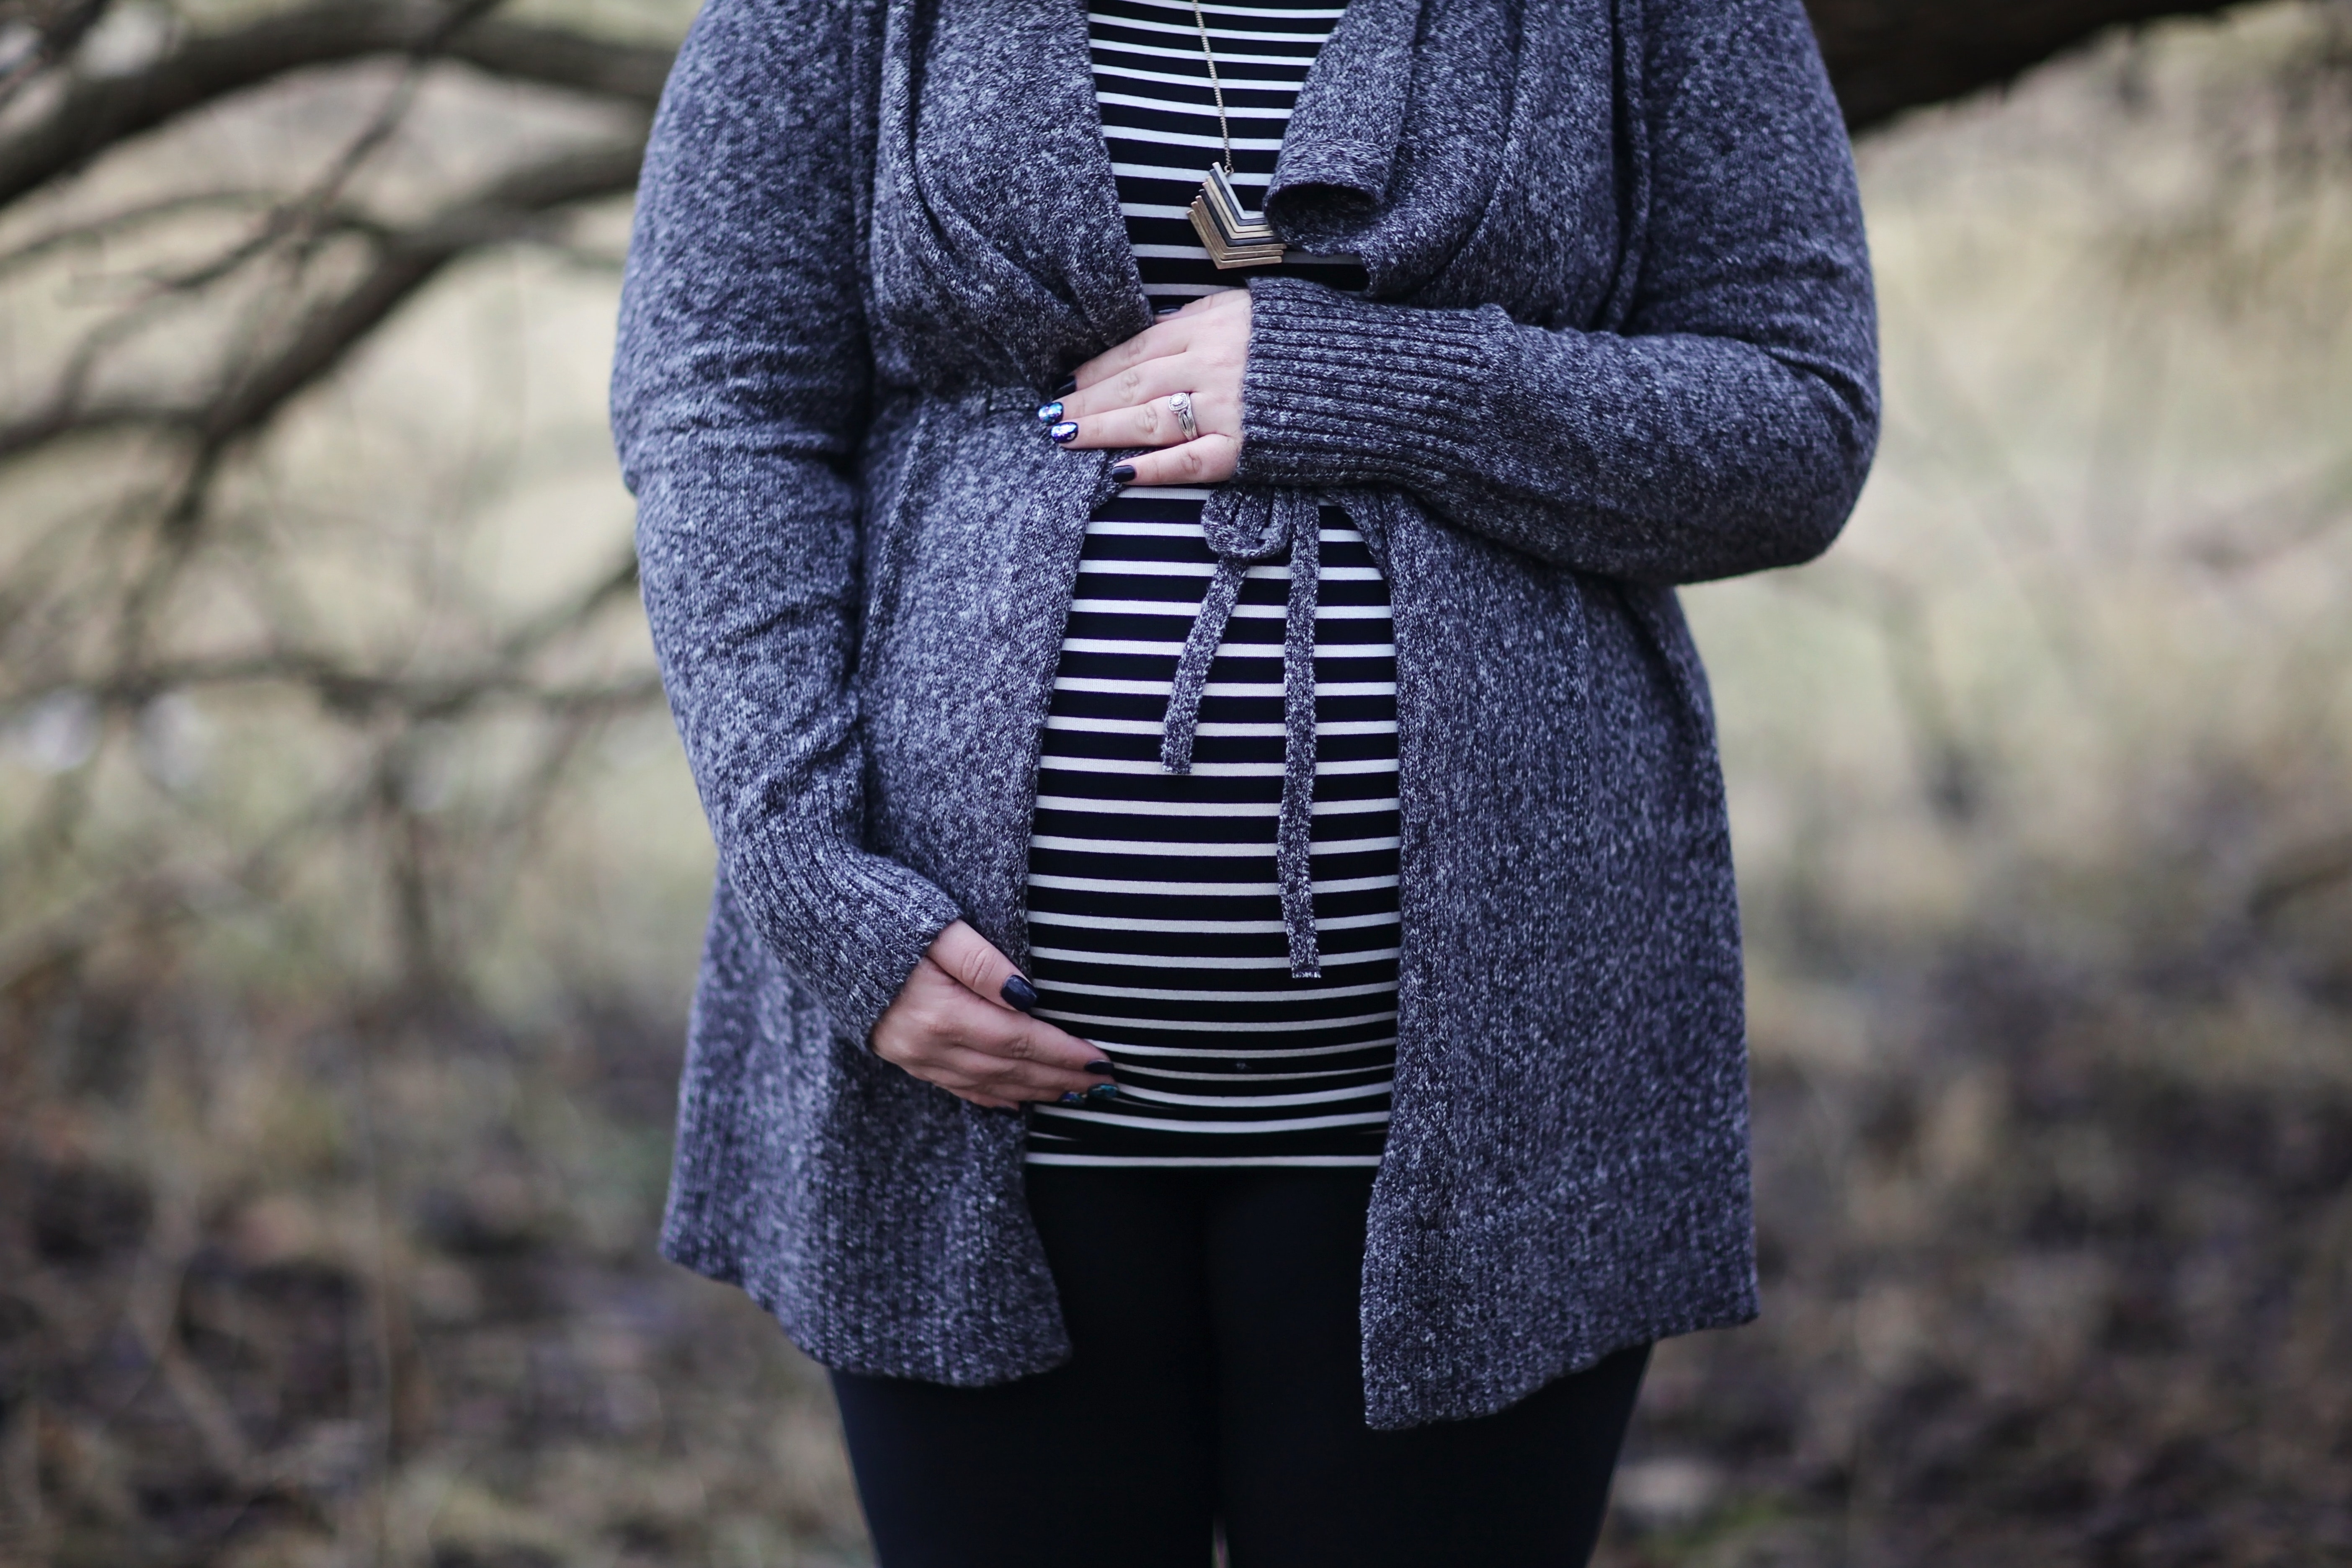 Photograph of a pregnant woman holding her belly